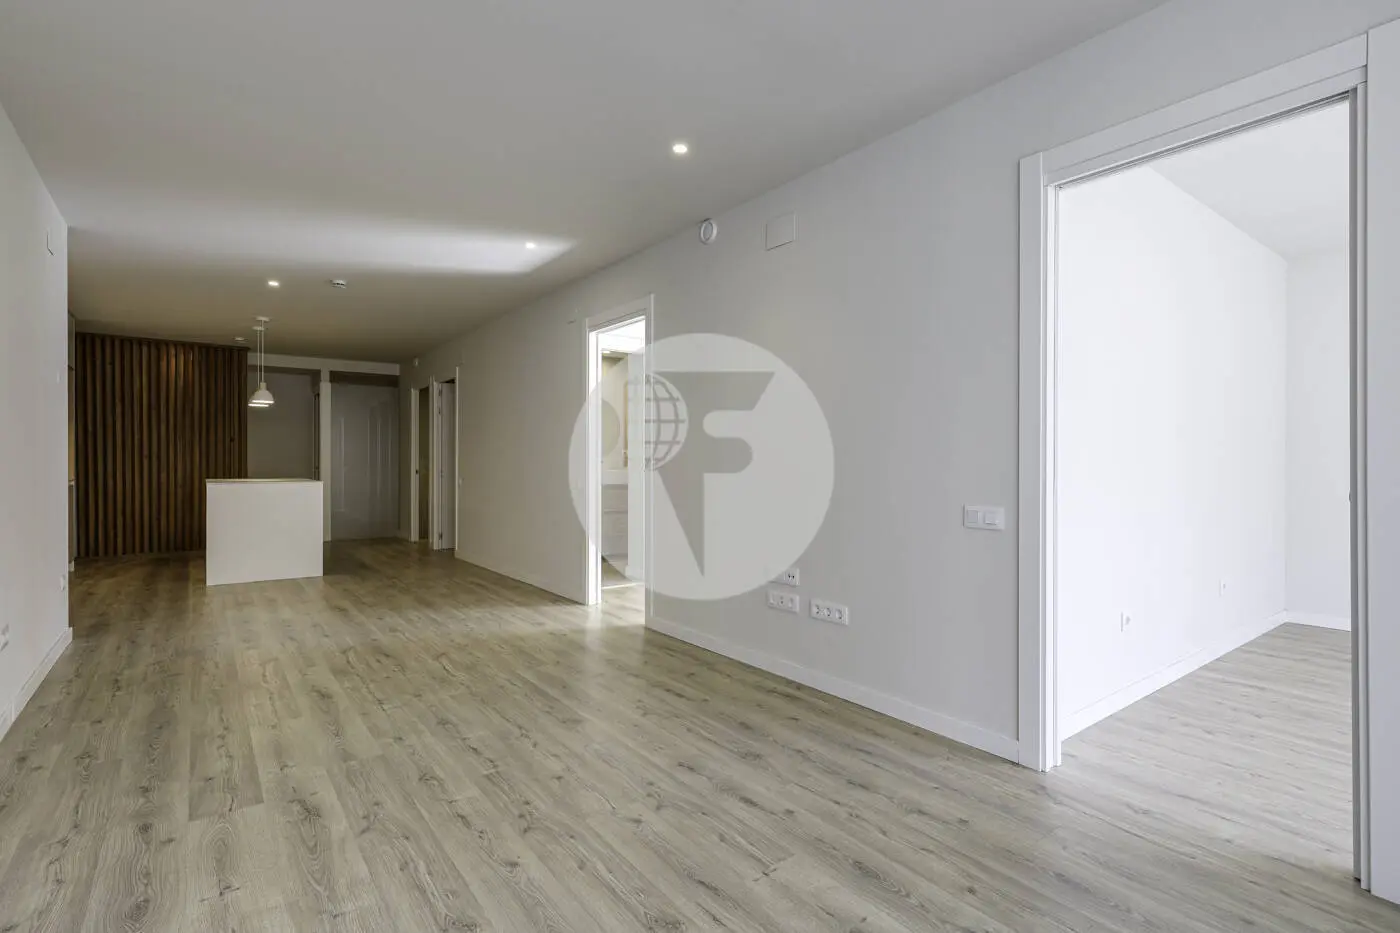 Apartment with three bedrooms and 2 bathrooms completely renovated, brand new 26